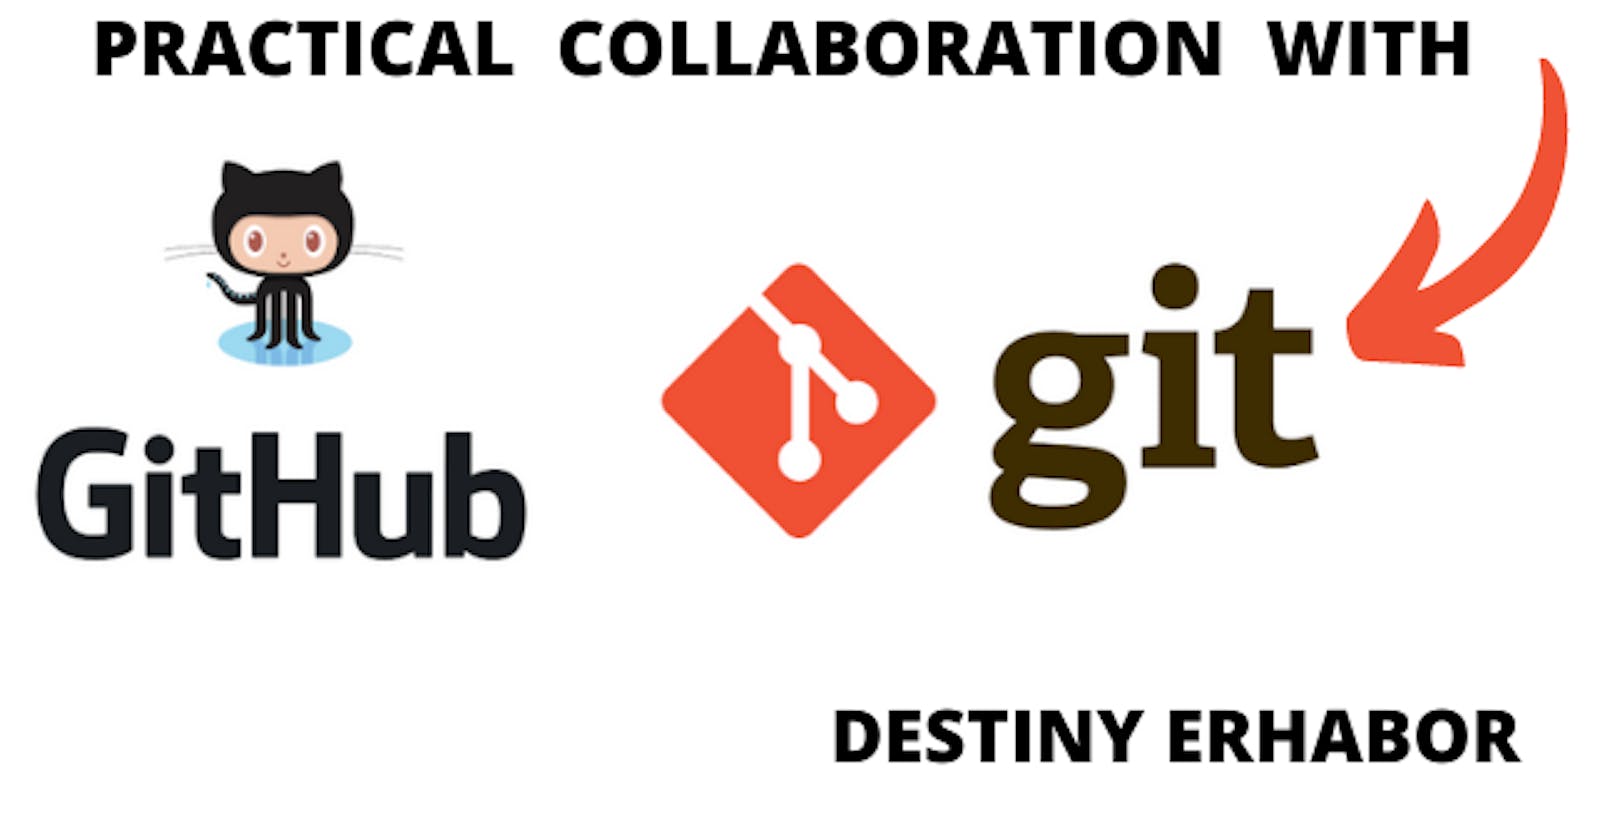 Practical Collaborative Strategy for teams and open source enthusiasts with GIT